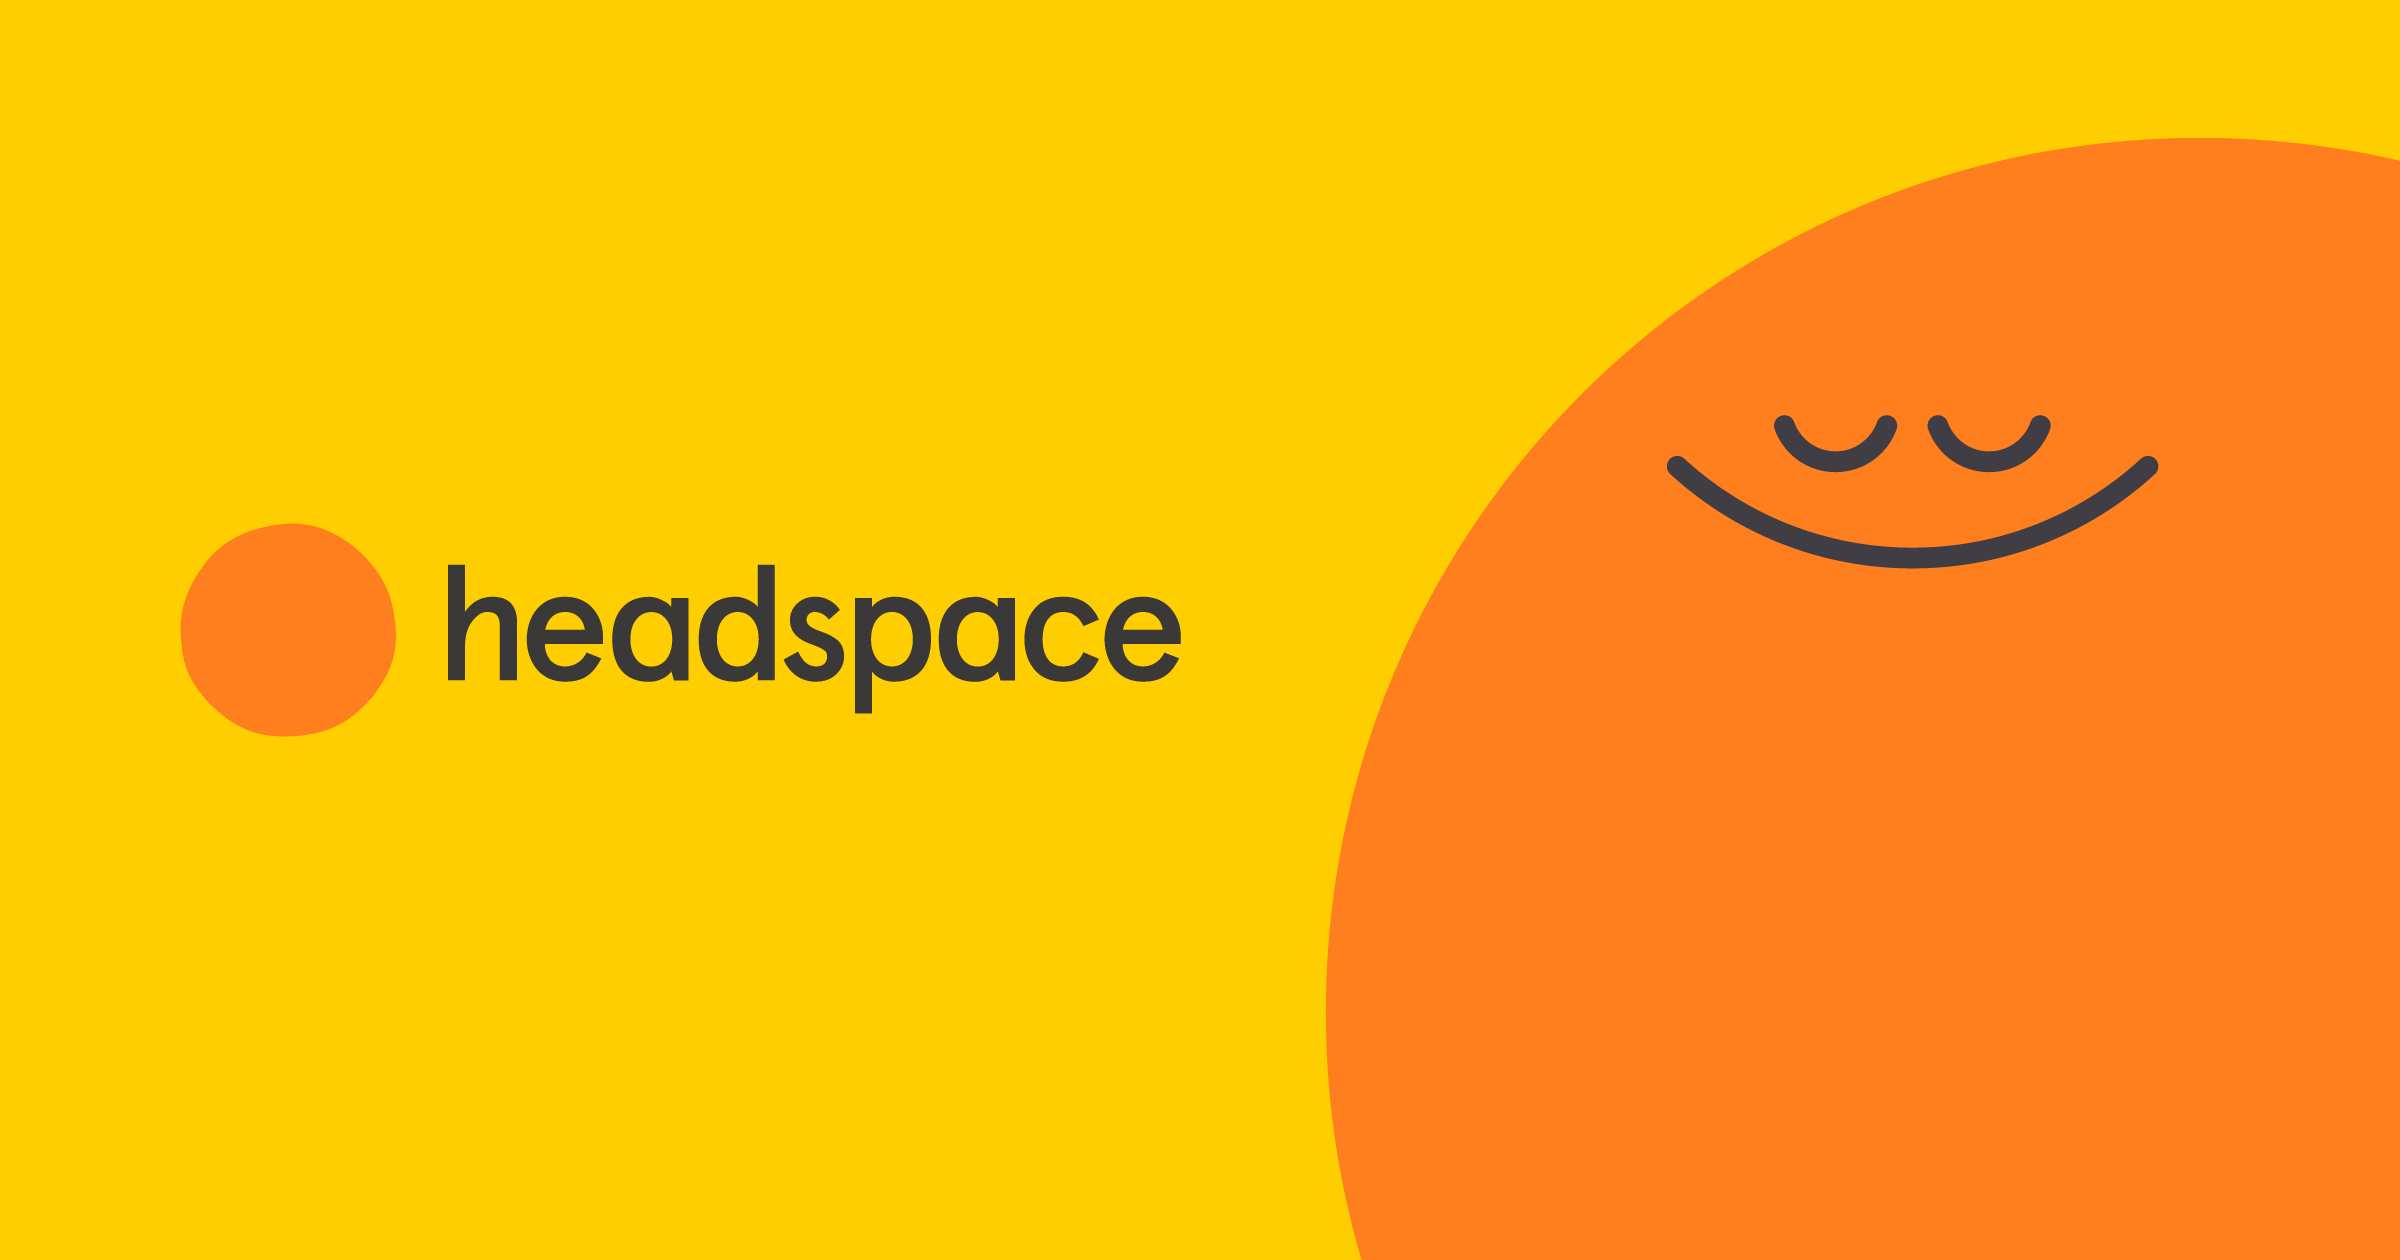 Spectrum Health partners with Headspace, offers access to mental health app  to all team members - Spectrum Health Newsroom